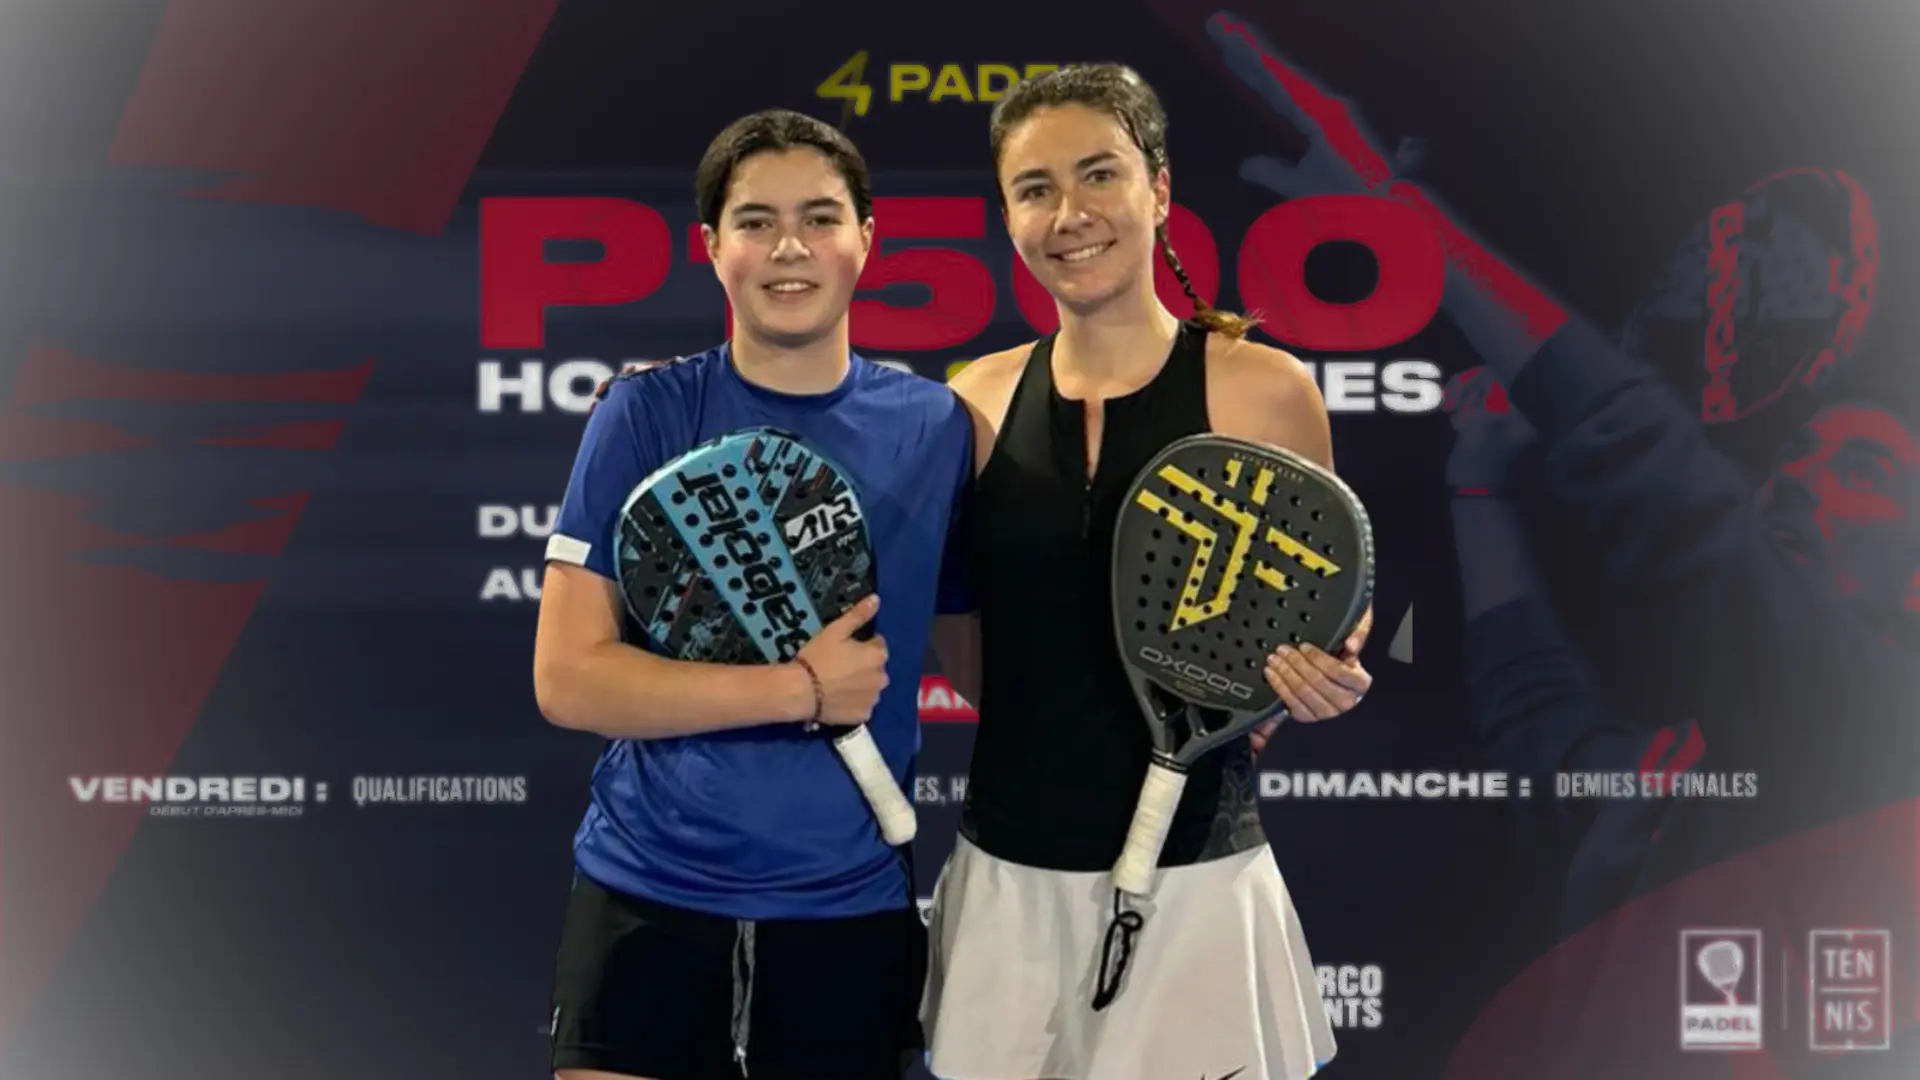 Bahurel / Sireix gets his revenge and wins the P1500 4PADEL Maroon!